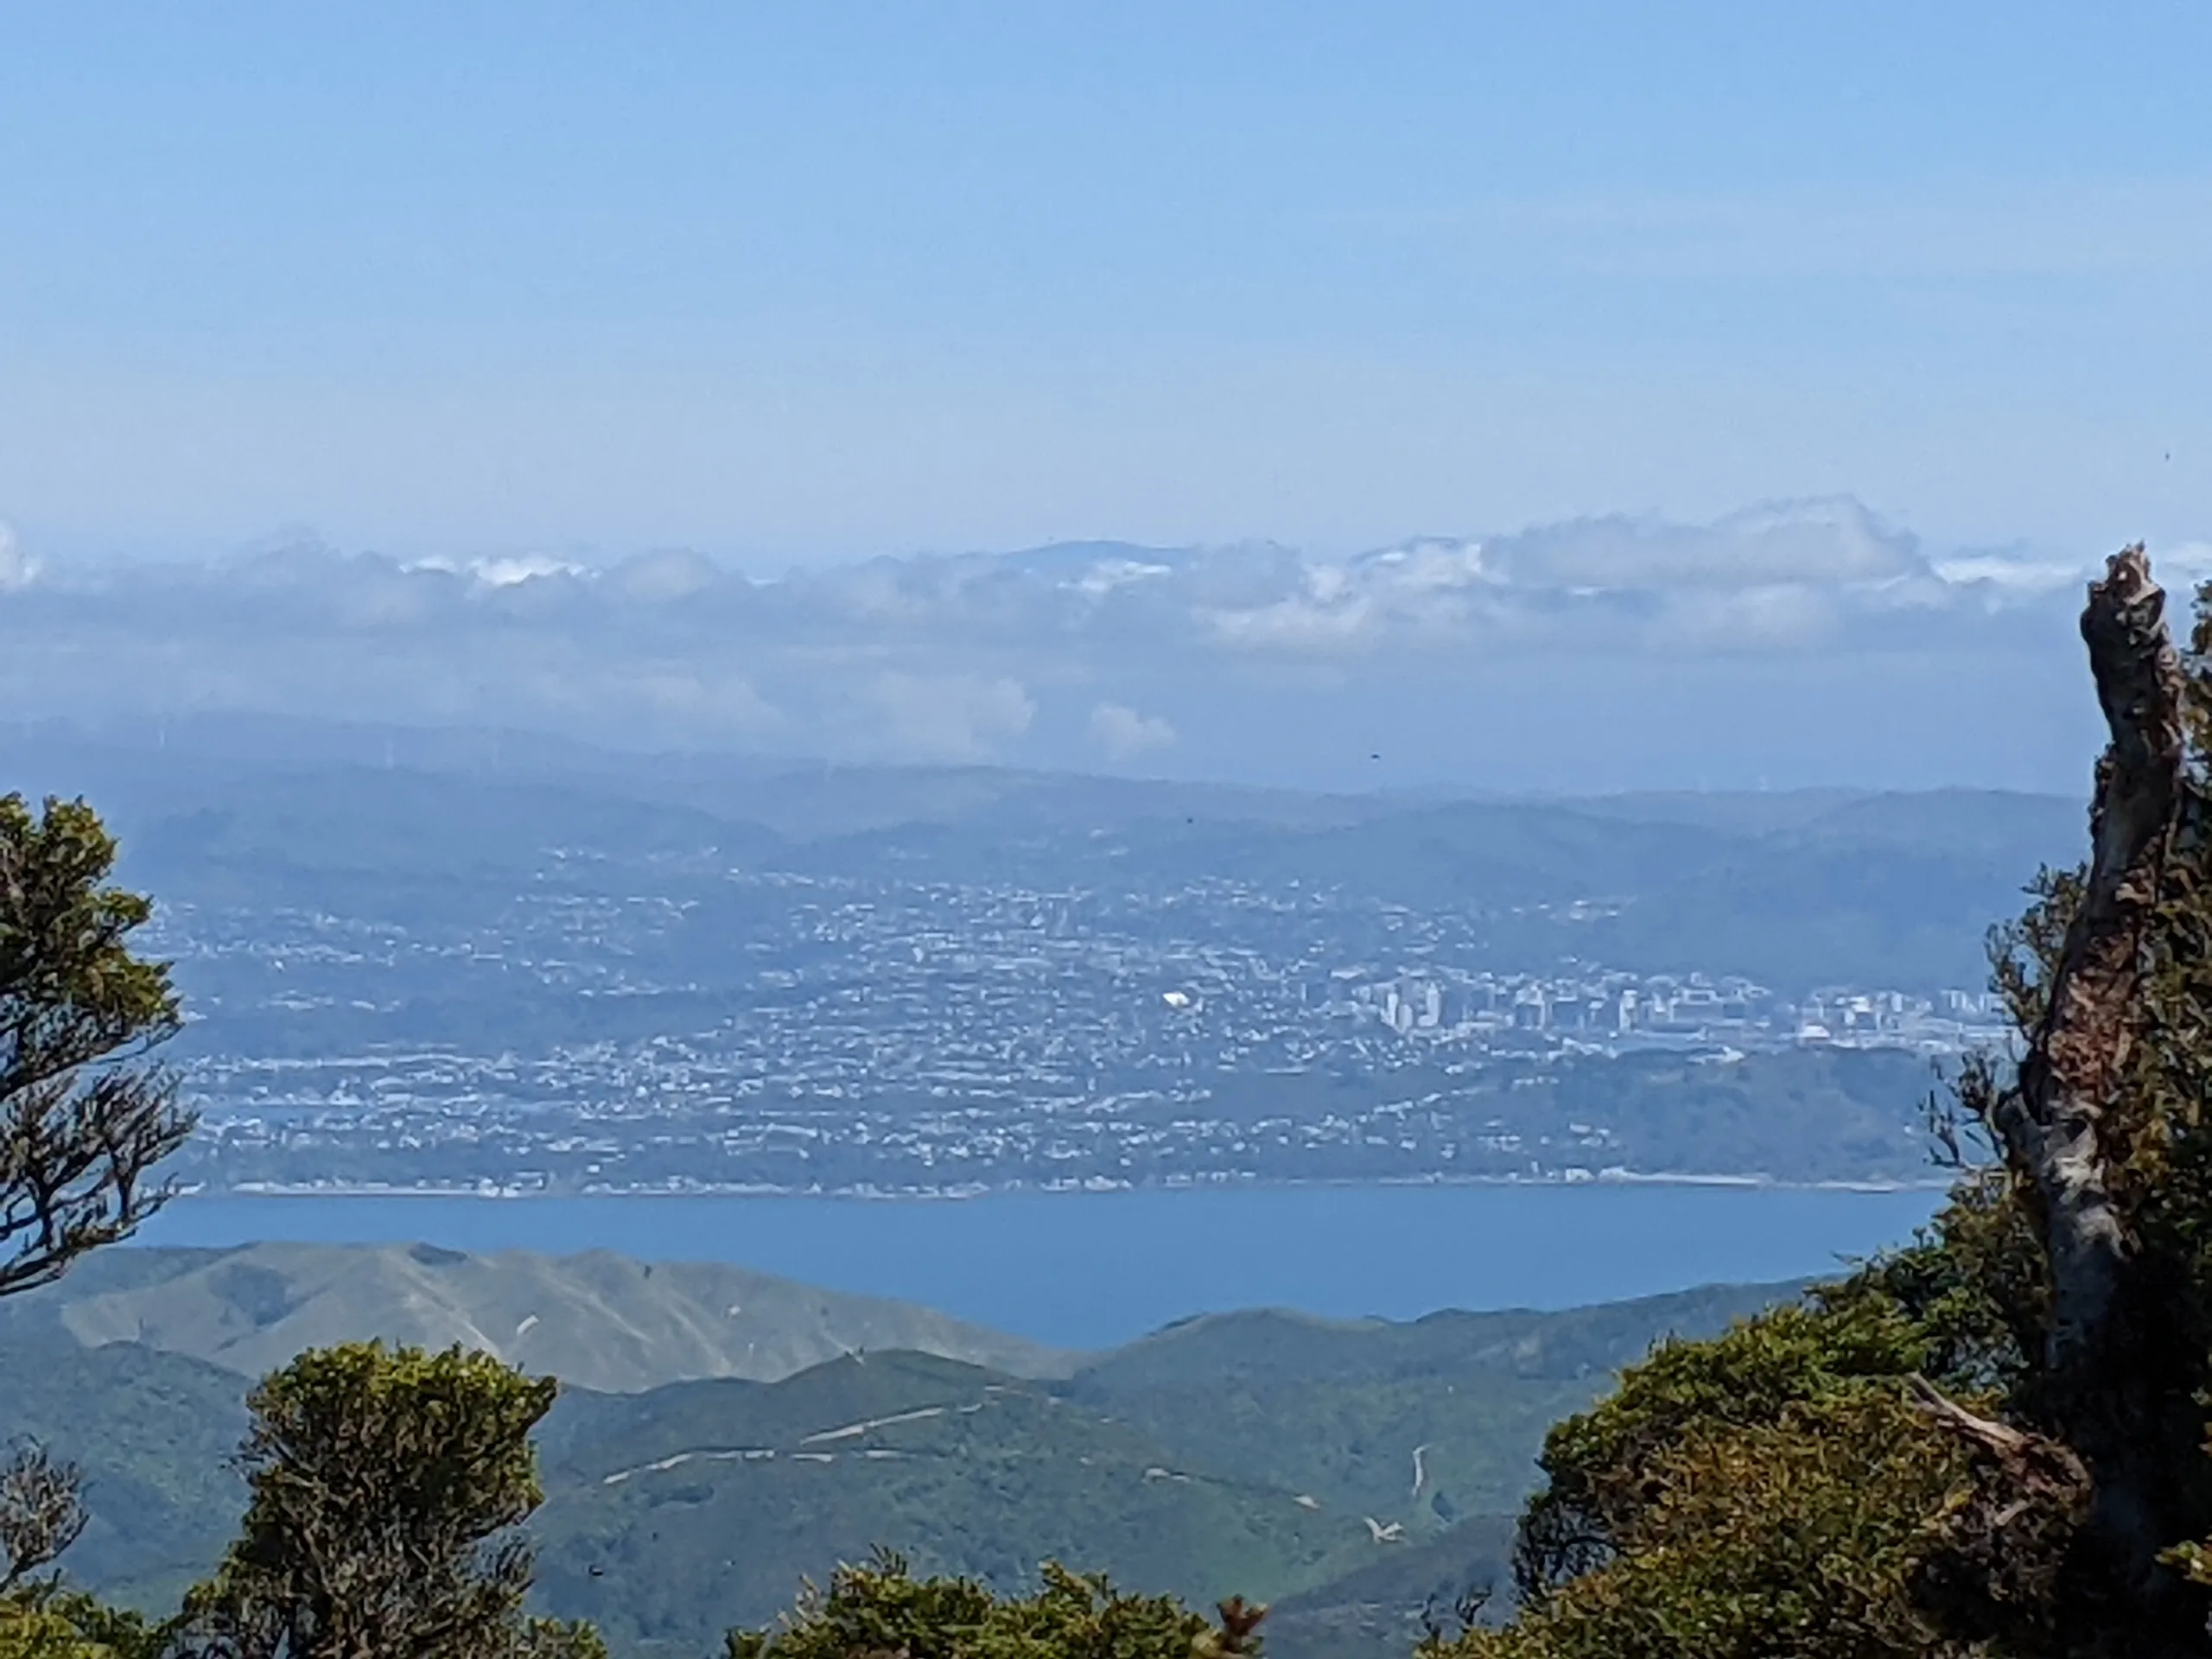 If you get the angles right you can catch a glimpse of Wellington city. I had to zoom way in on my cellphone photo but that's a large portion of the city in frame.